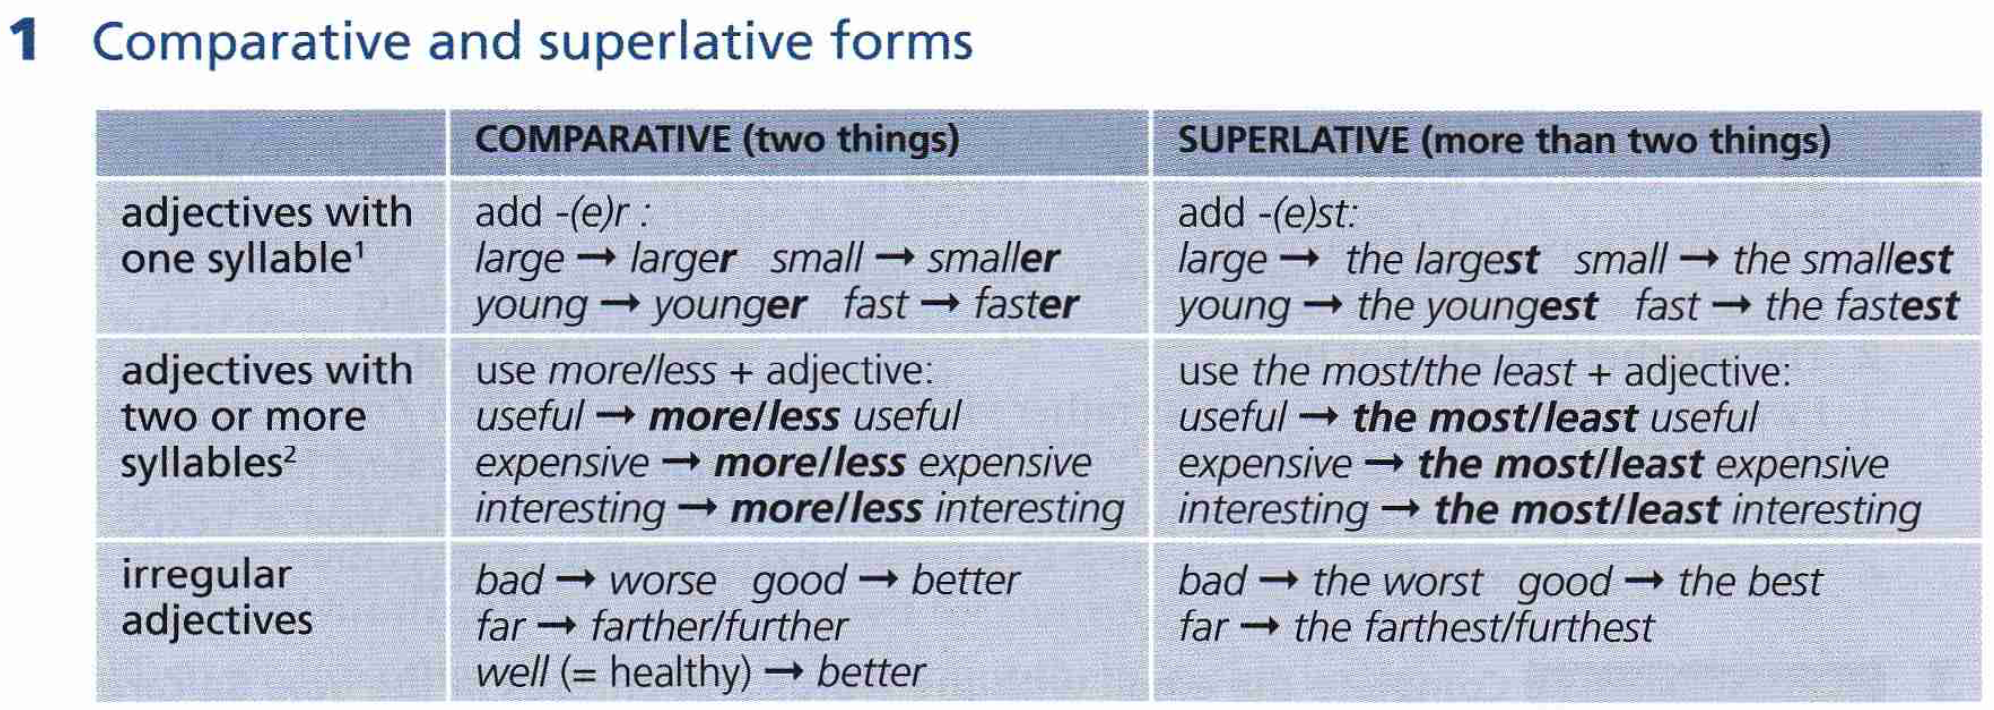 Much comparative and superlative forms. Comparatives and Superlatives правило. Таблица Comparative and Superlative. Comparative and Superlative adjectives правило. Degrees of Comparison of adjectives таблица.